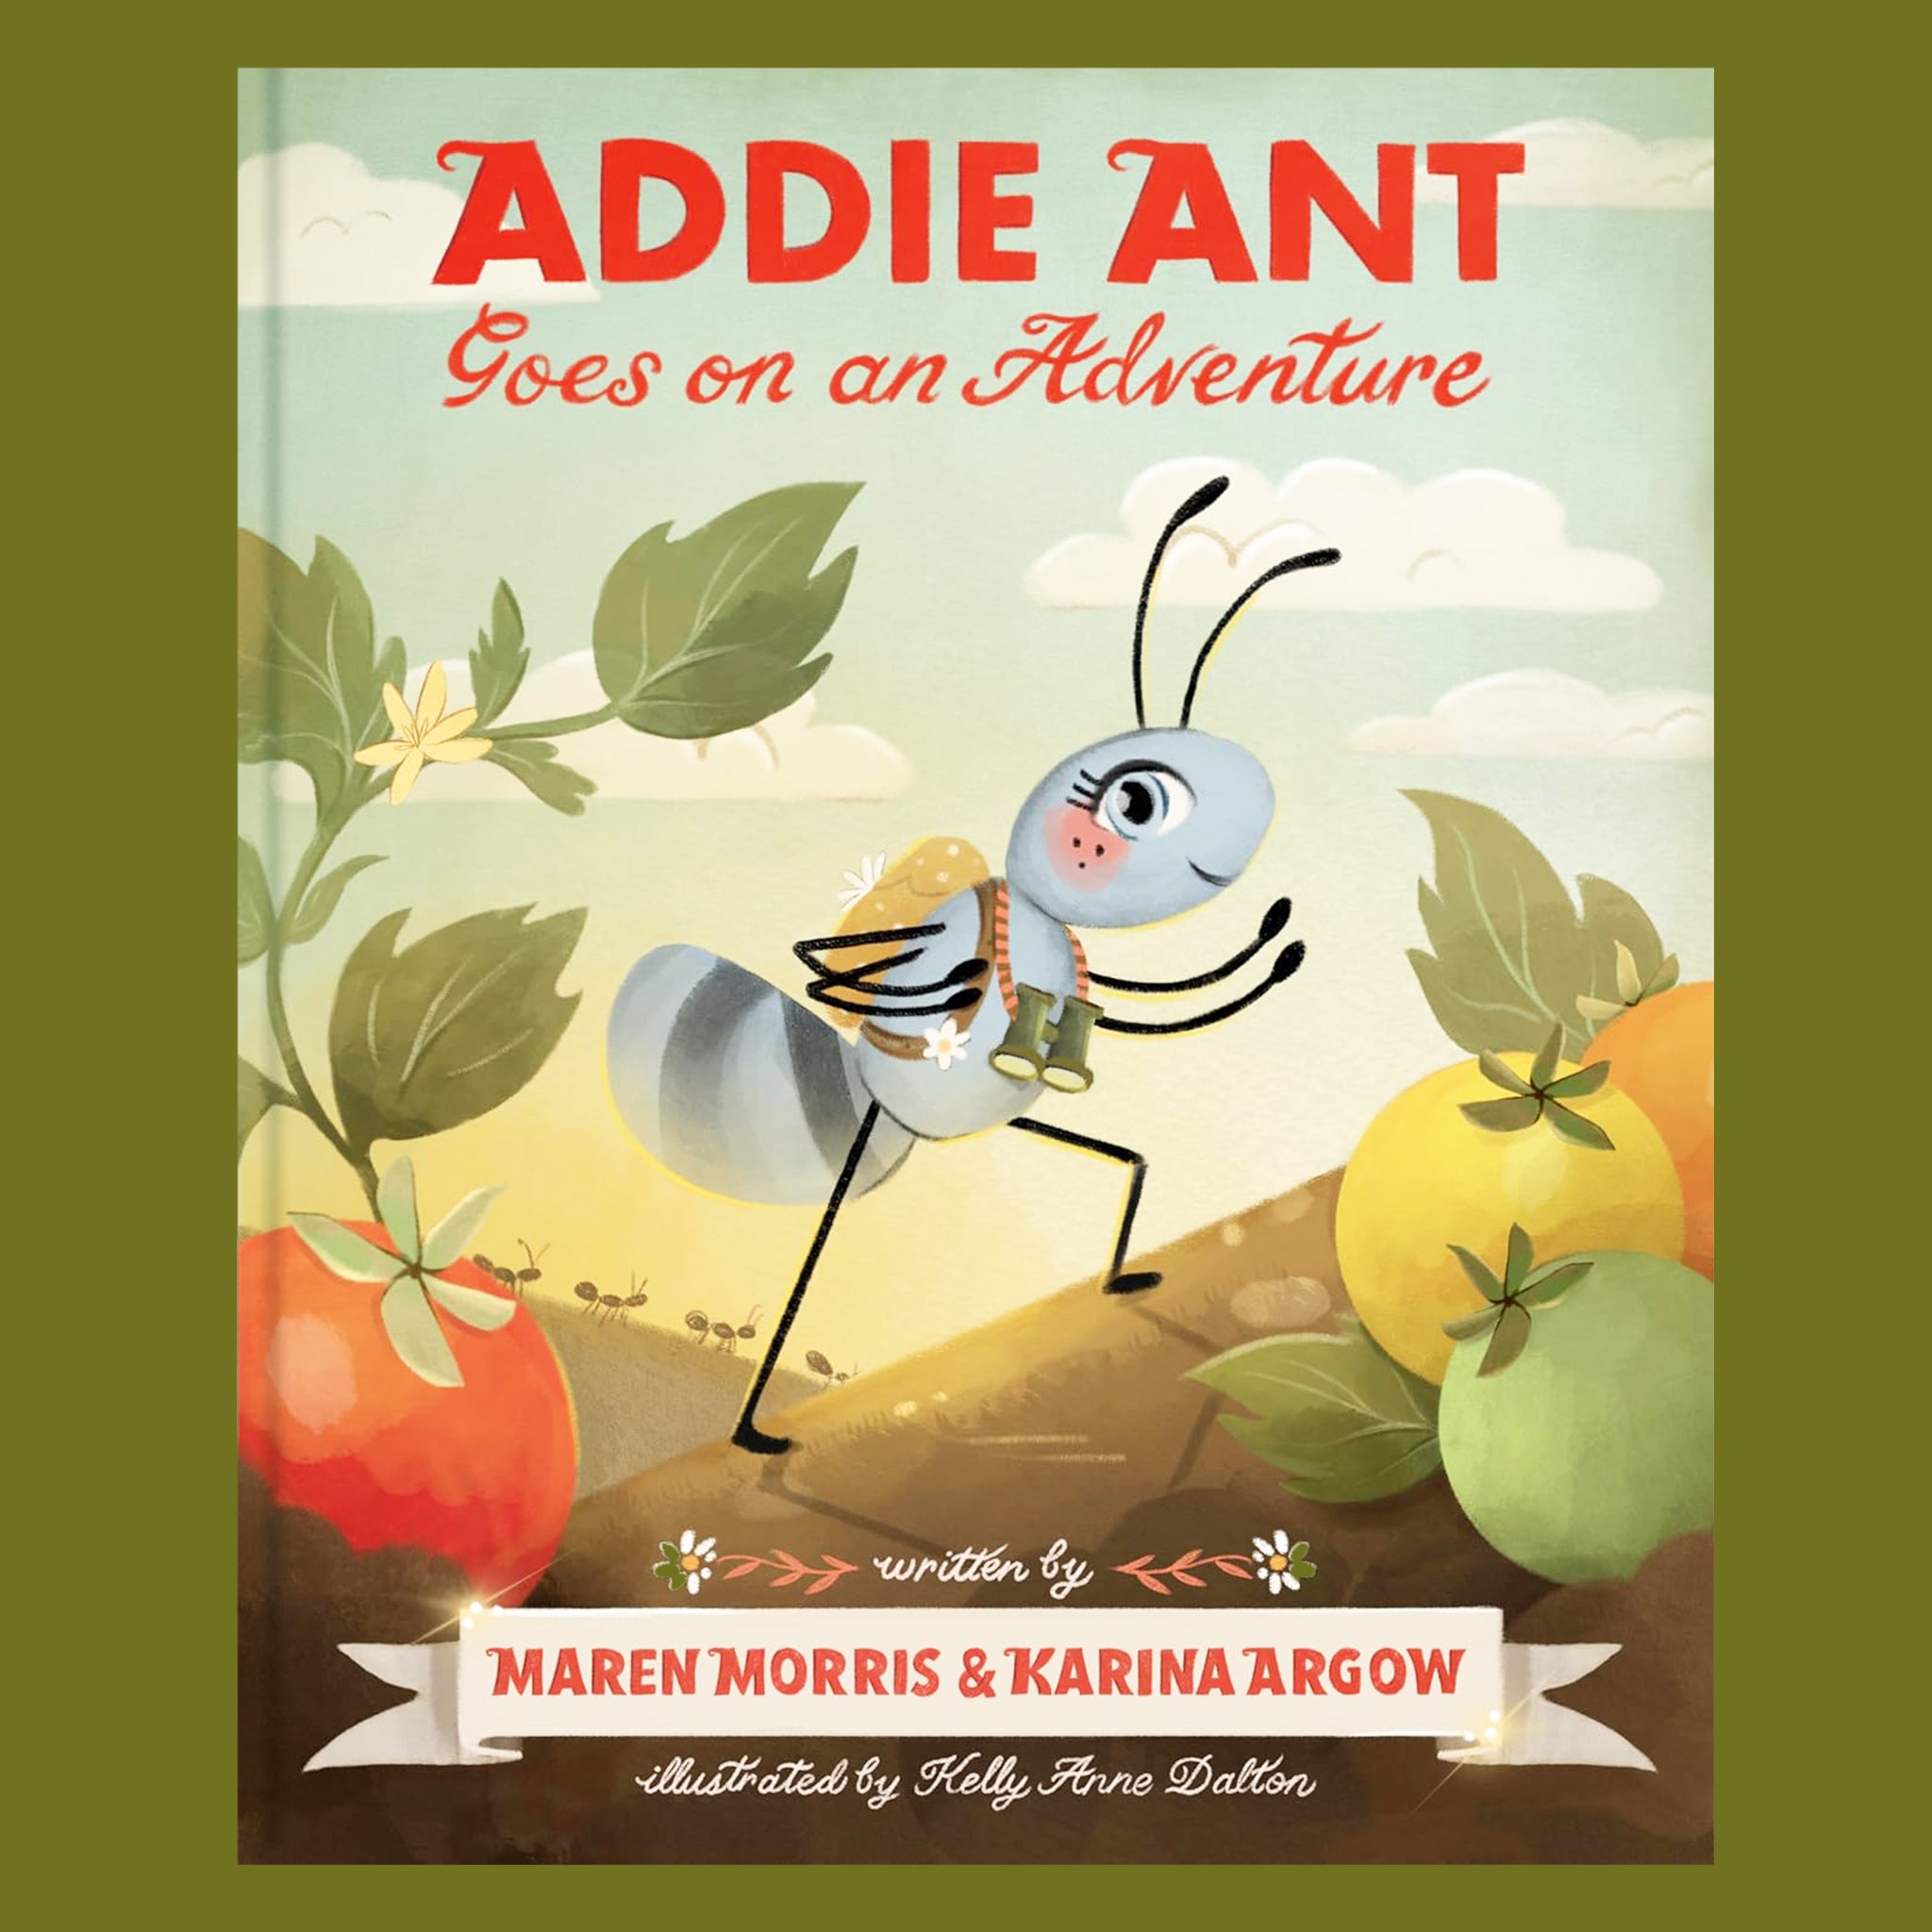 On a green background is a book cover with an illustration of an ant surrounded by tomatoes and text at the top that reads, "Addie Ant Goes on an Adventure". 